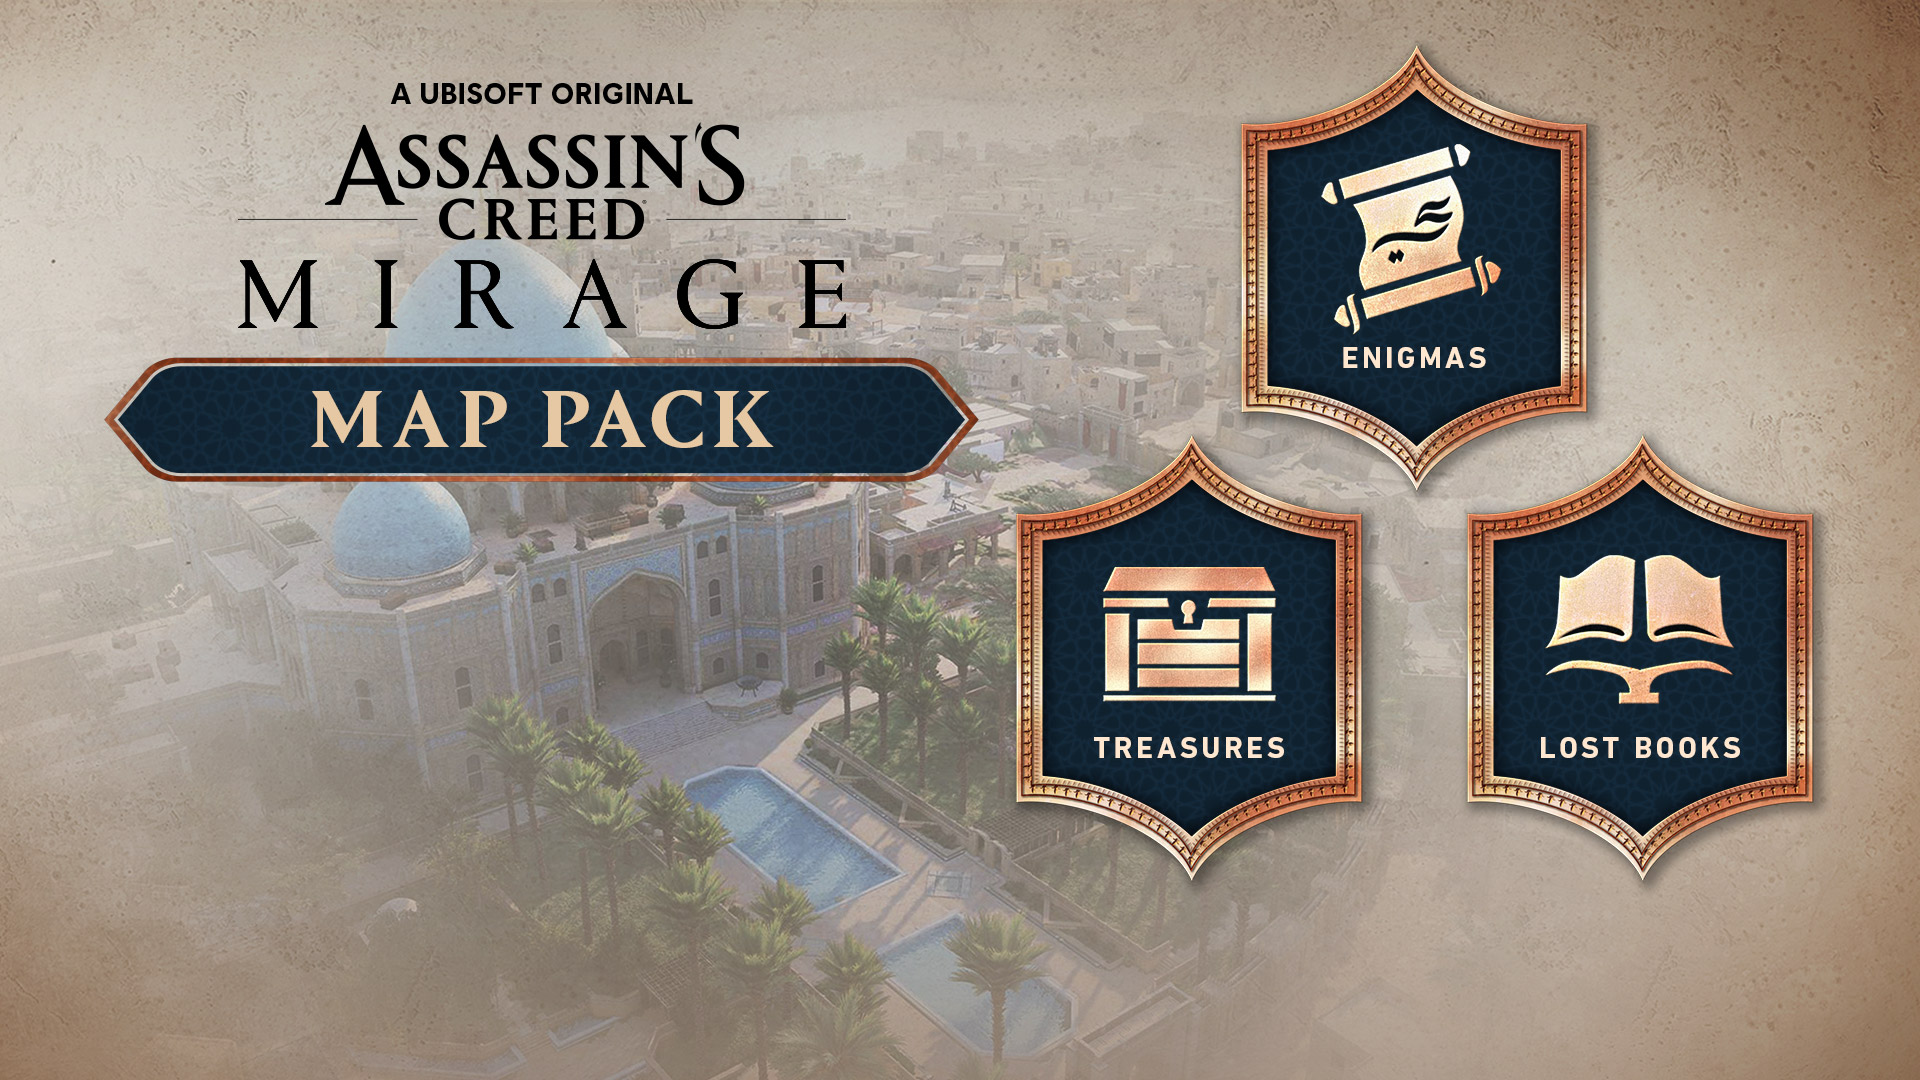 Assassin's Creed Mirage - Map Pack DLC AR XBOX One / Xbox Series X|S CD Key, $7.9